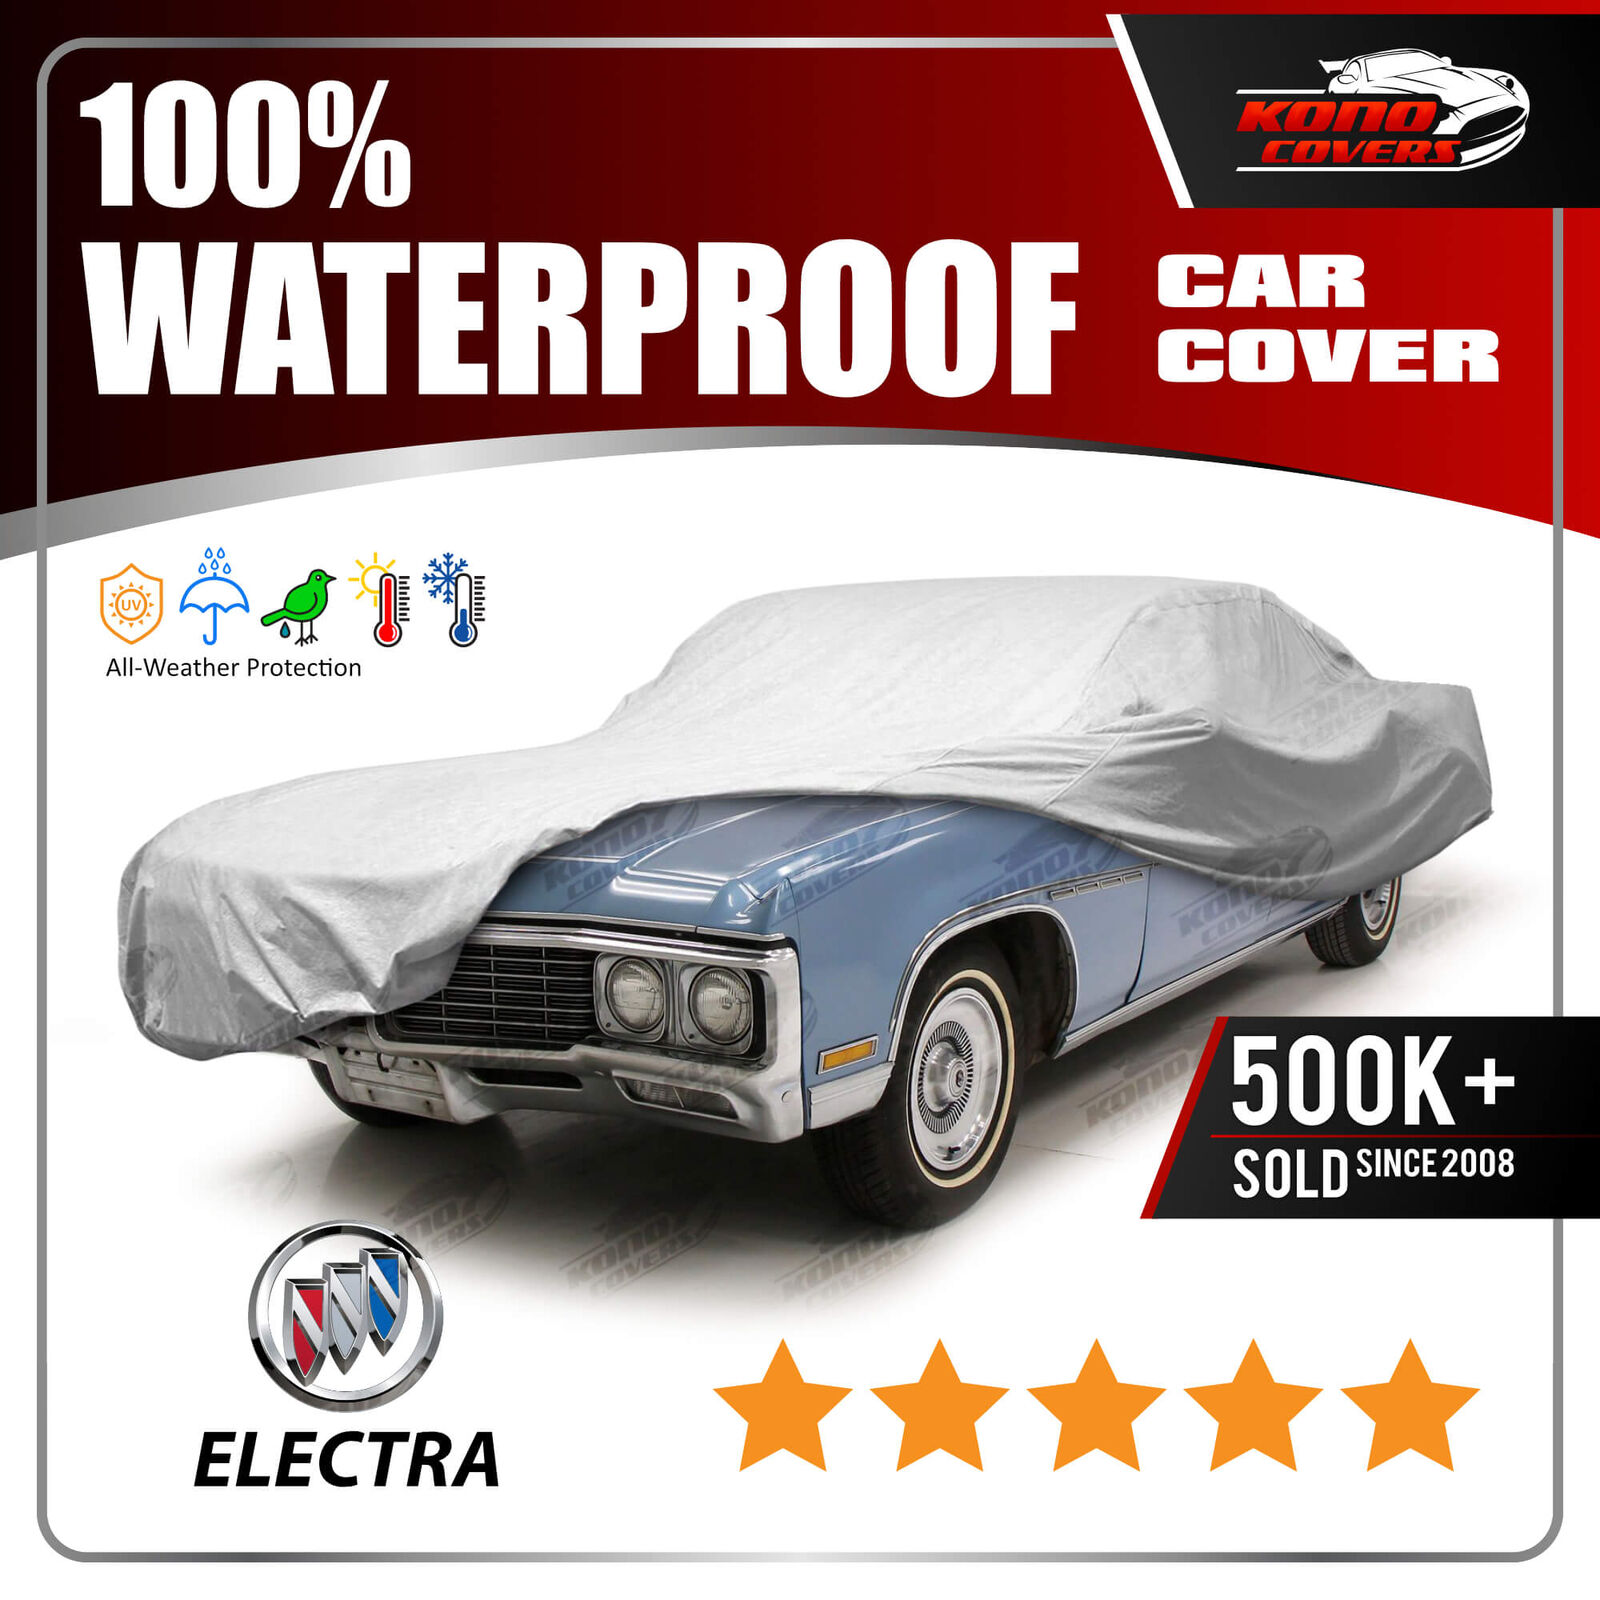 BUICK ELECTRA 1965-1970 CAR COVER - 100% Waterproof 100% Breathable